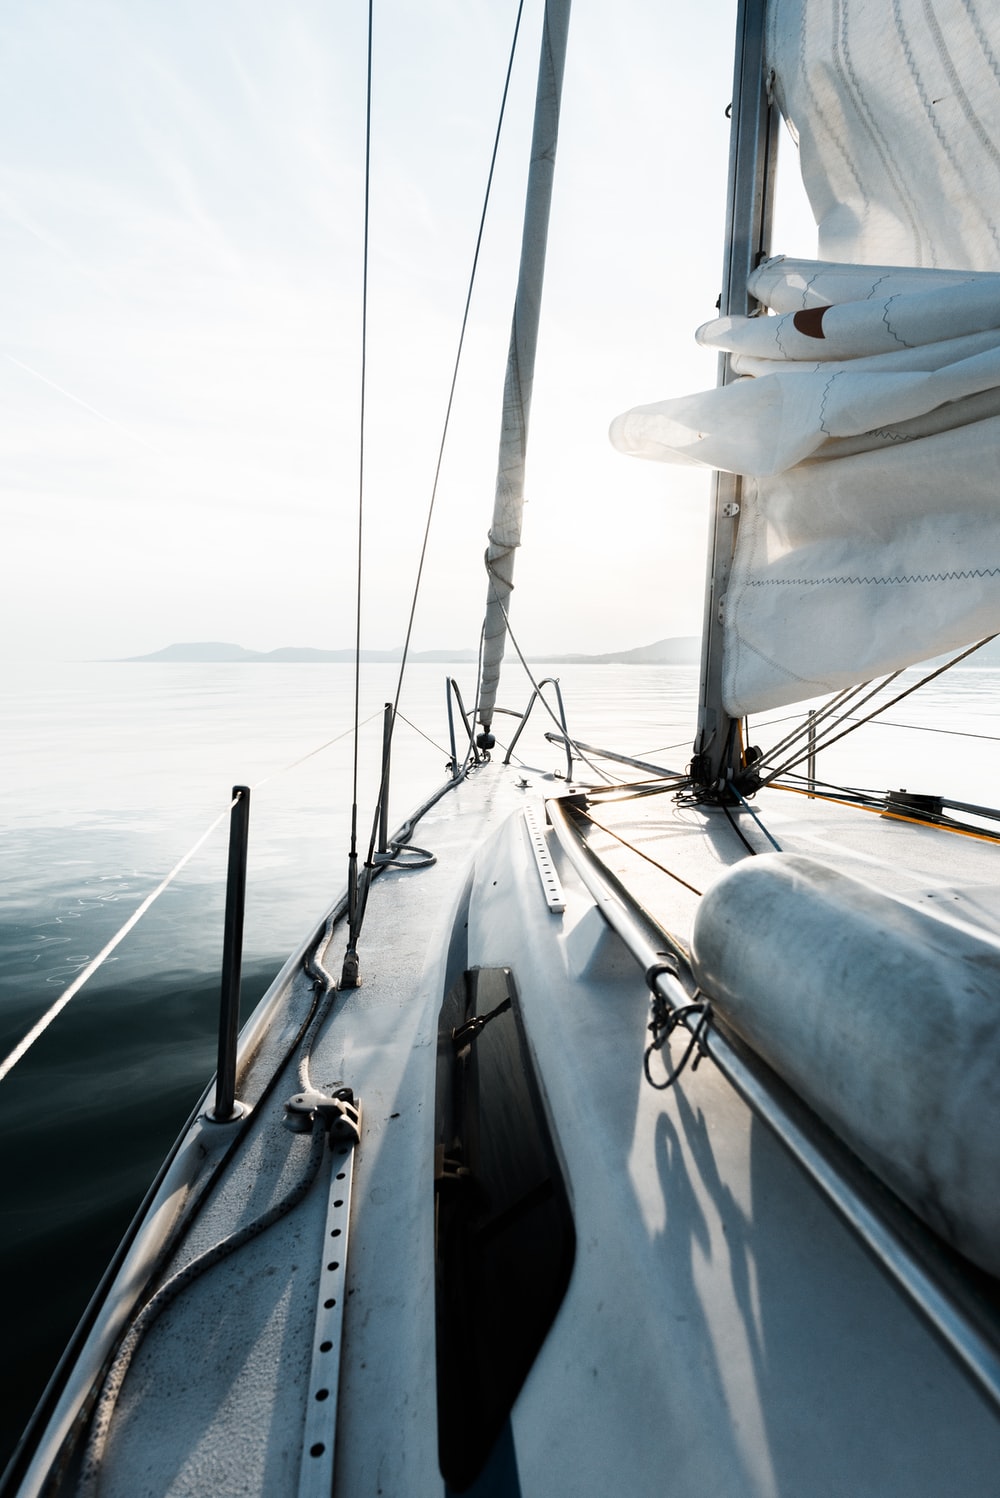 Sailing Picture. Download Free Image